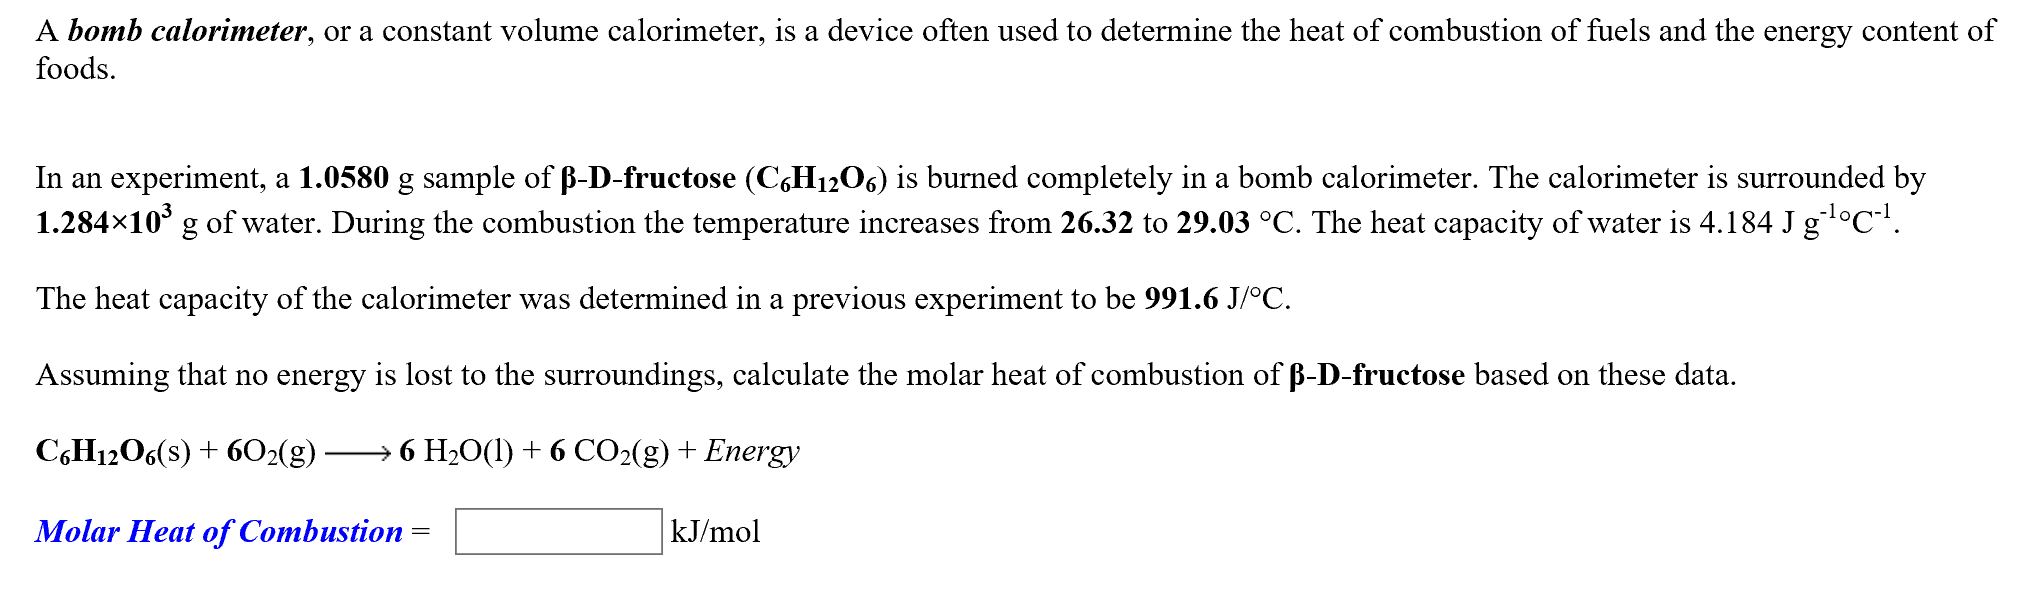 A bomb calorimeter, or a constant volume calorimeter, is a device often used to determine the heat of combustion of fuels and the energy content of
foods
In an experiment, a 1.0580 g sample of B-D-fructose (CH1206) is burned completely in a bomb calorimeter. The calorimeter is surrounded by
1.284x10 g of water. During the combustion the temperature increases from 26.32 to 29.03 °C. The heat capacity of water is 4.184 J 81°C
The heat capacity of the calorimeter was determined in a previous experiment to be 991.6 J/°C
Assuming that no energy is lost to the surroundings, calculate the molar heat of combustion of B-D-fructose based on these data
C6H12O6(s)602(g)
6 H20(l+6 CO2(g) + Energy
Molar Heat of Combustion
kJ/mol
